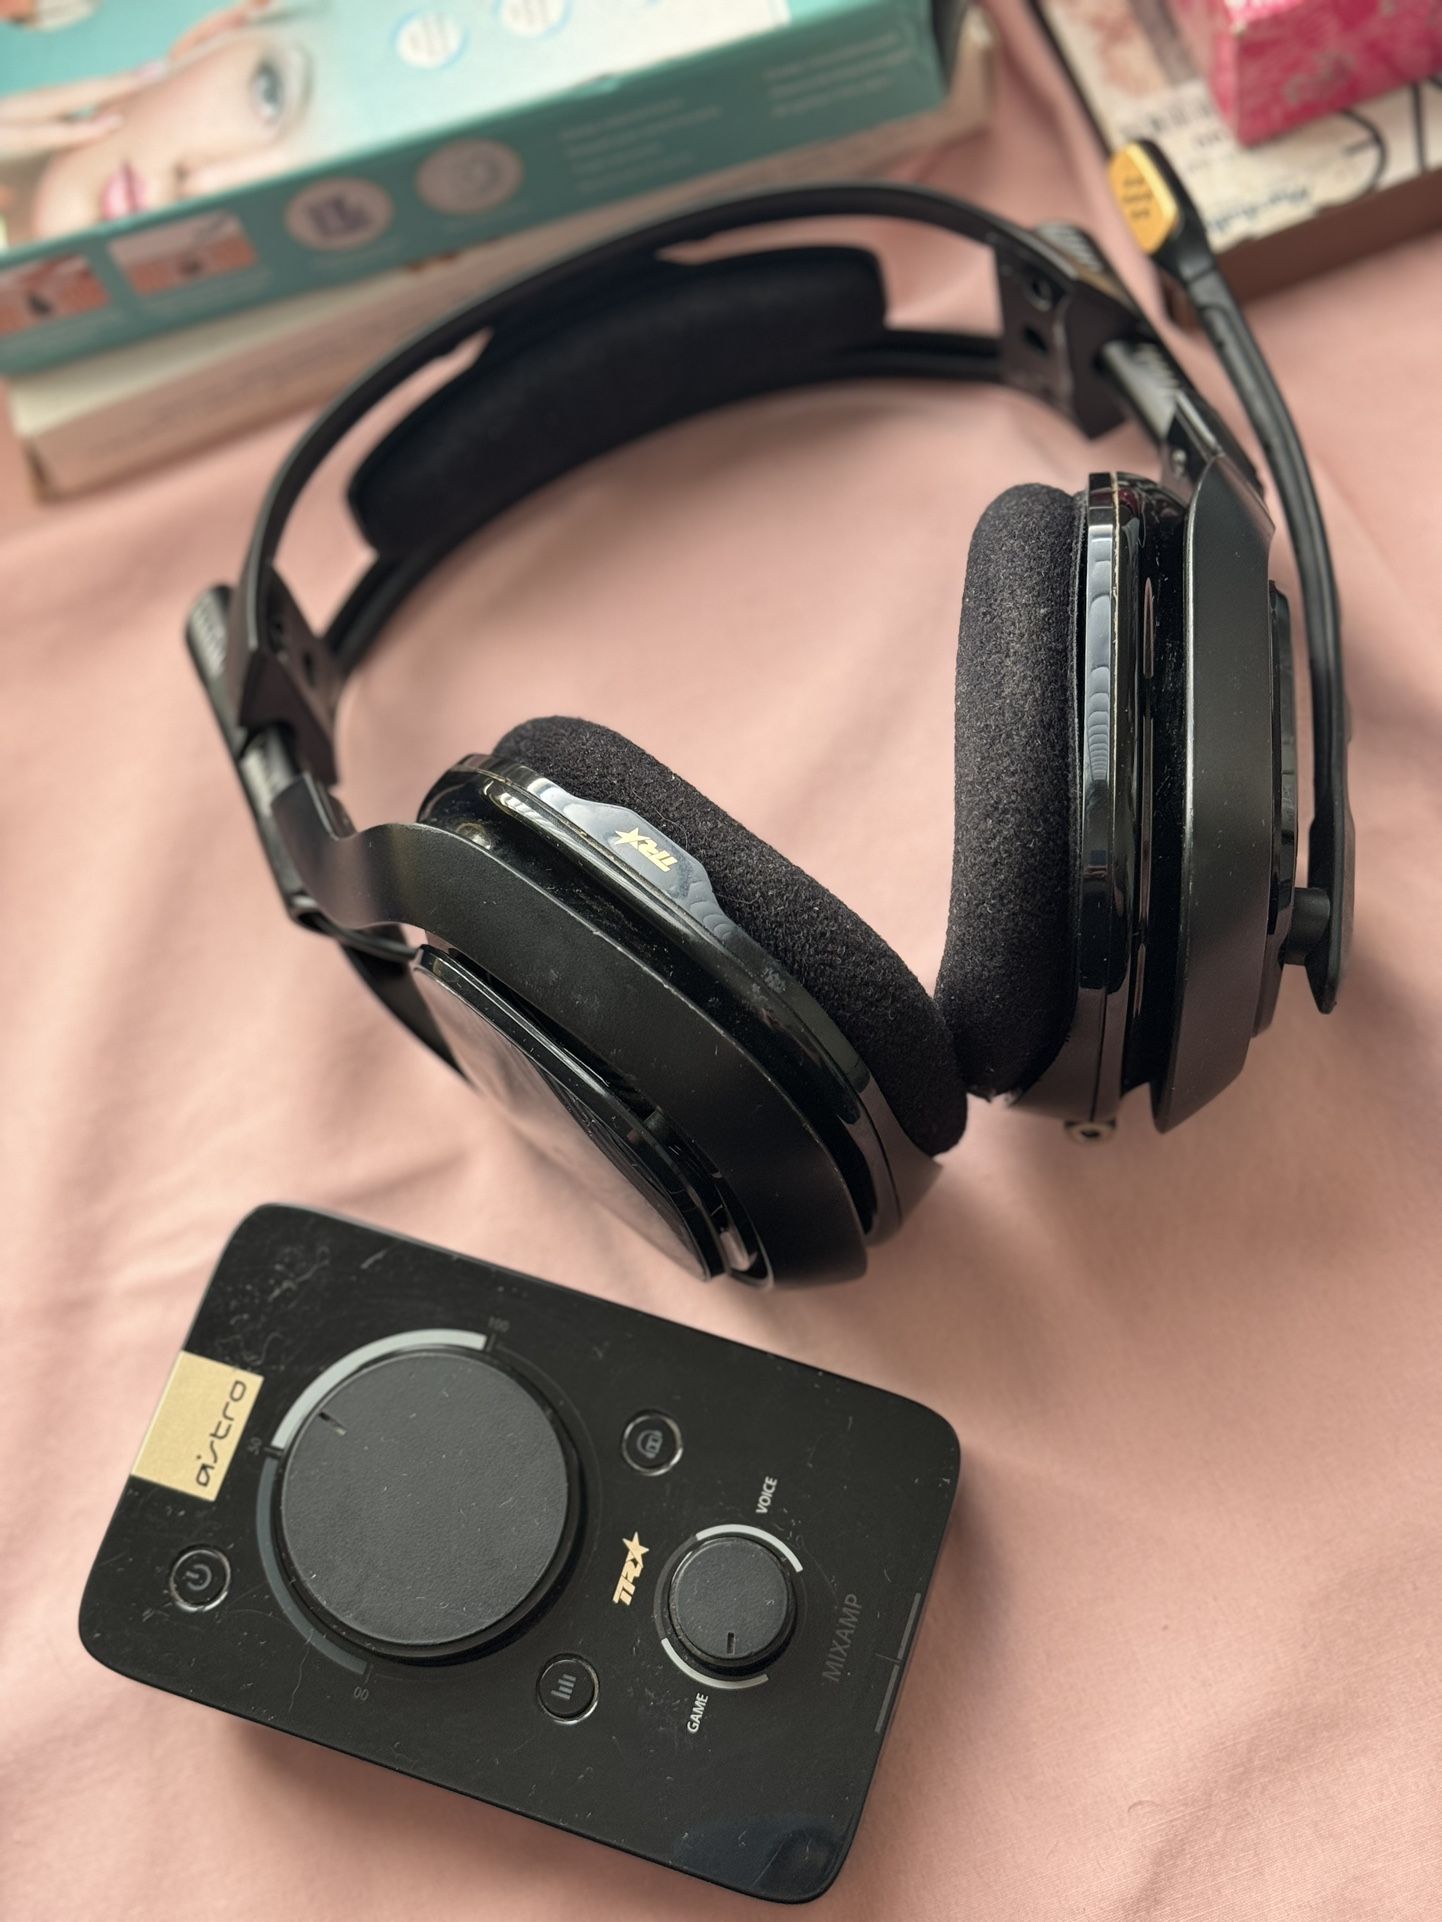 Astro A40 TR With Mixamp Pro